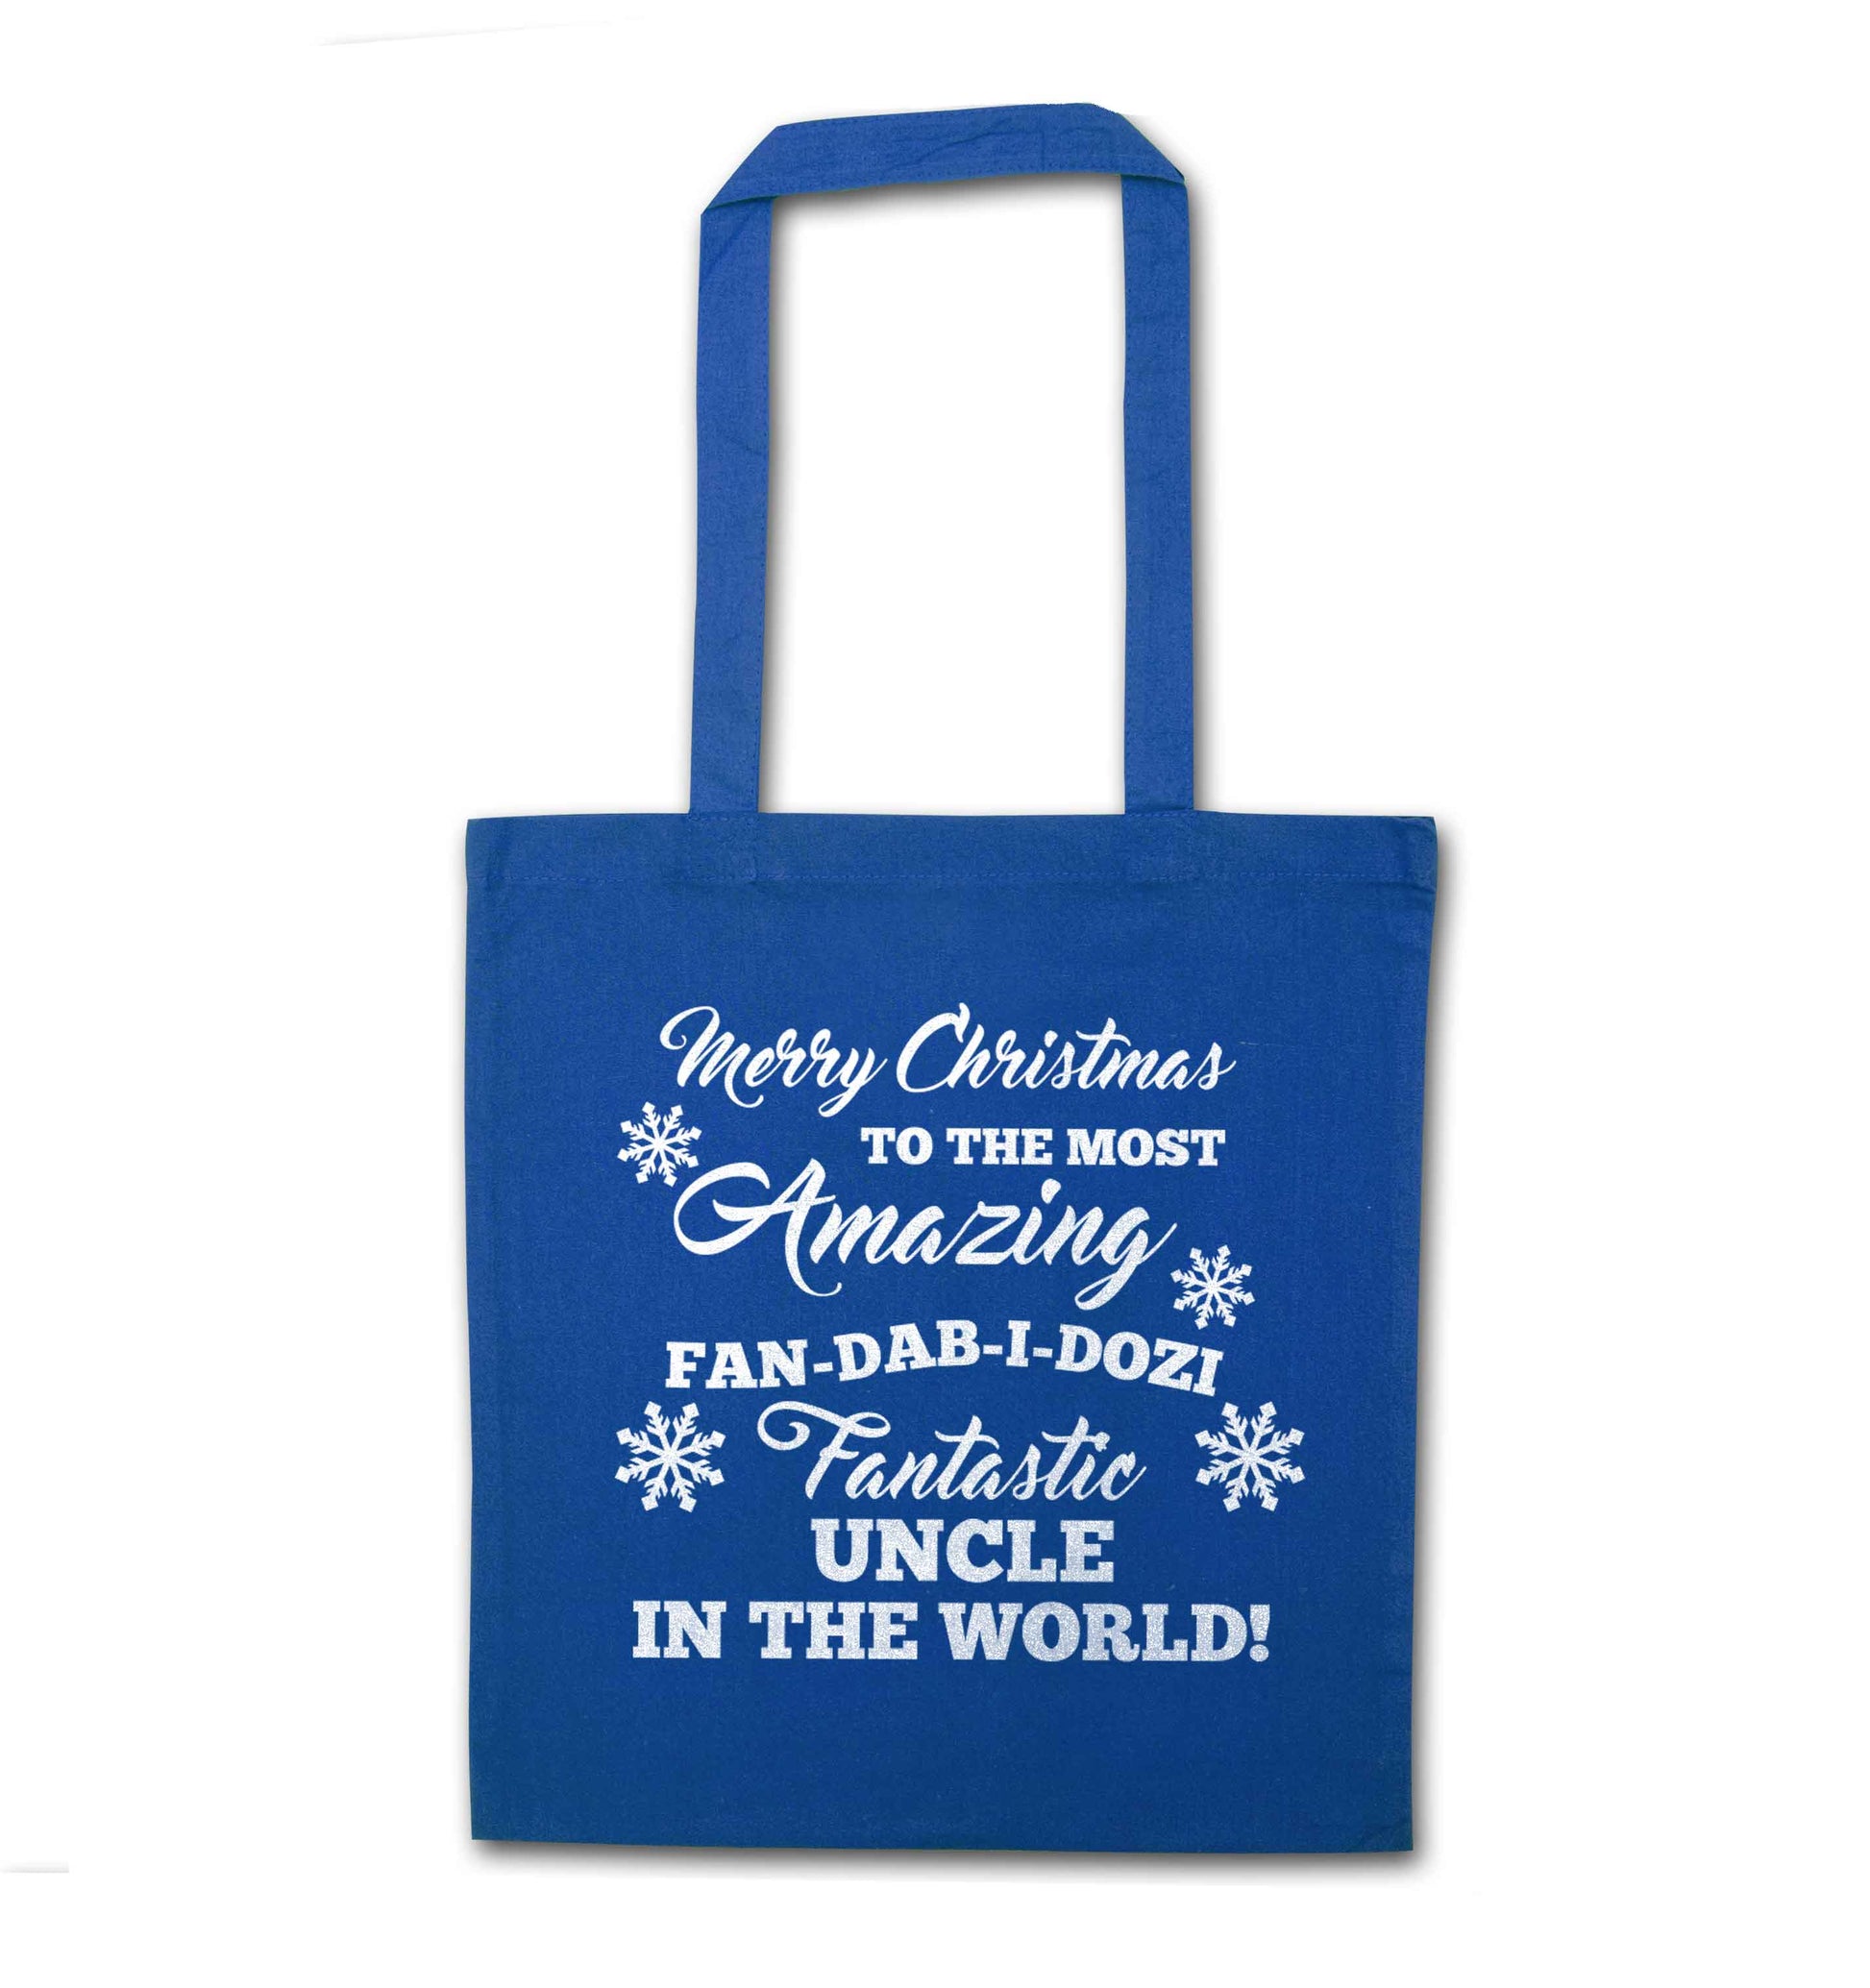 Merry Christmas to the most amazing fan-dab-i-dozi fantasic Uncle in the world blue tote bag